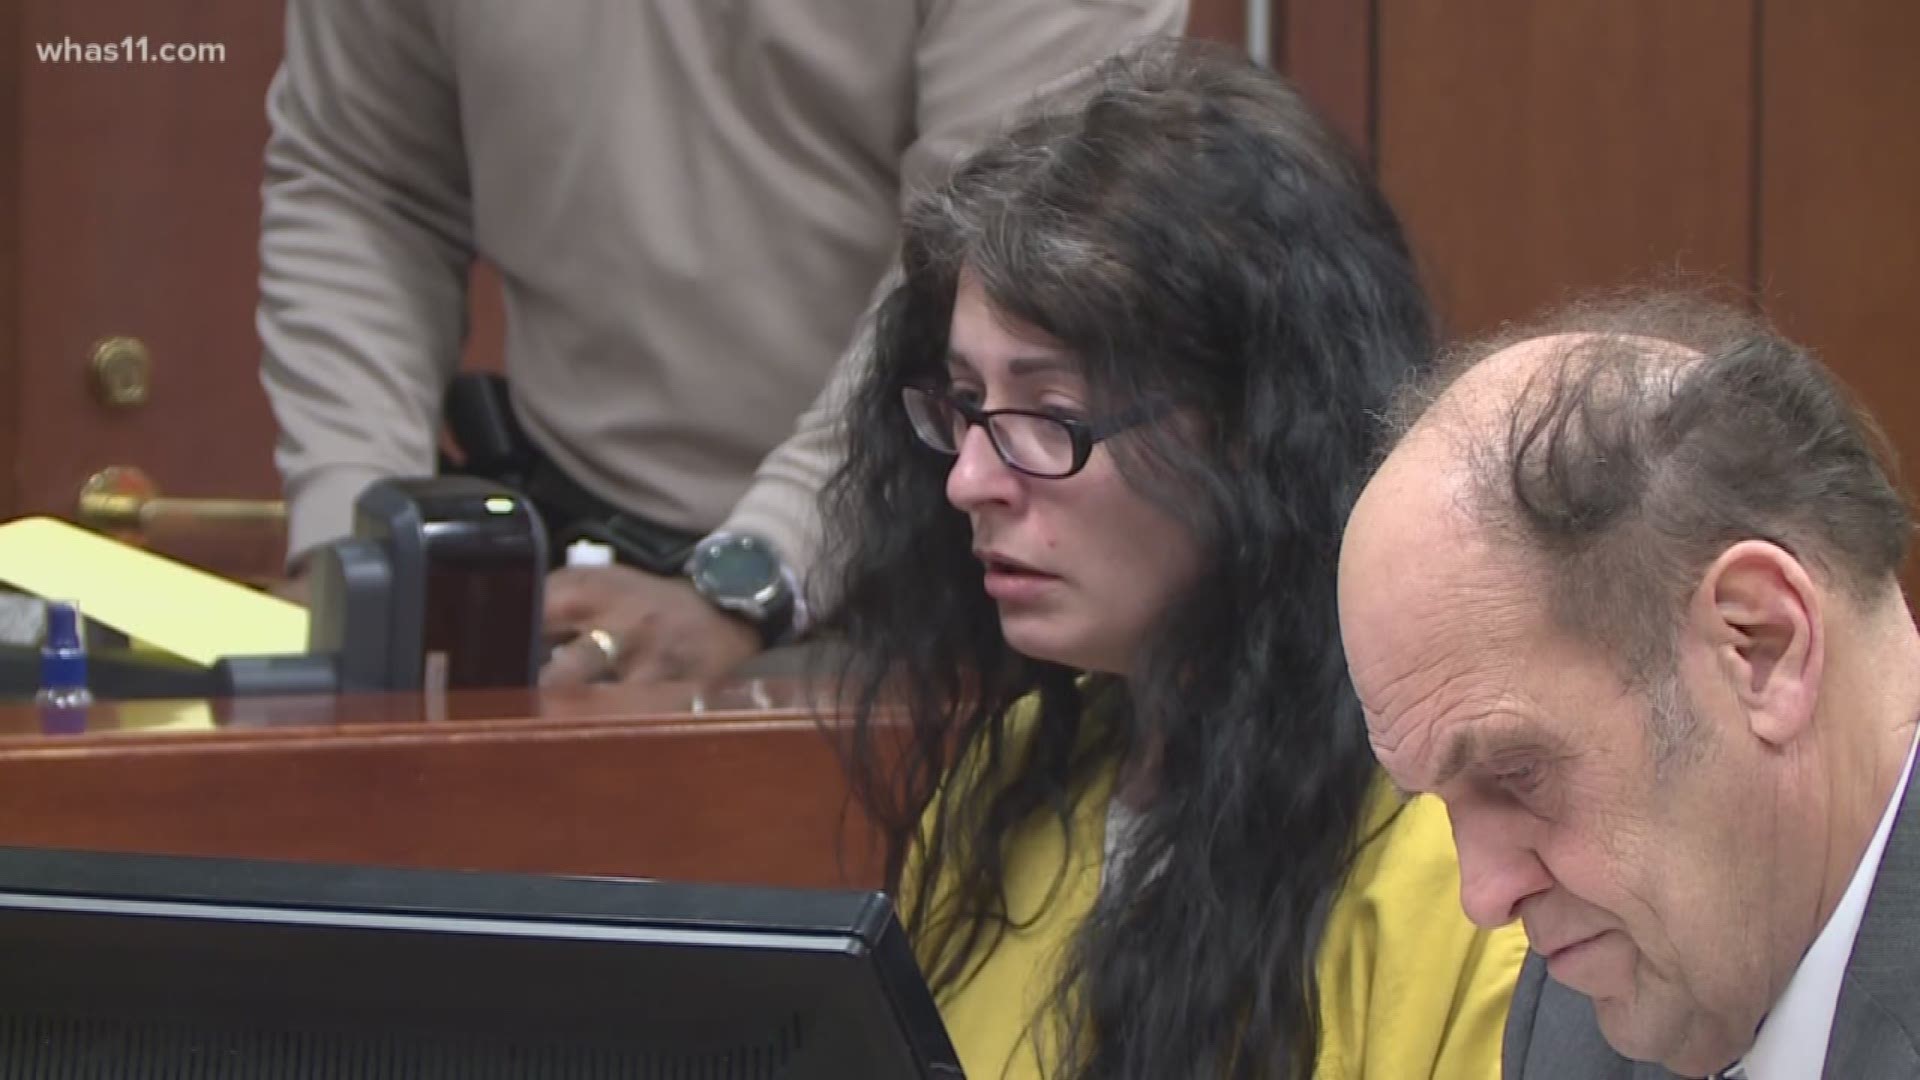 A woman accused of hiring a person to kill the father of her child in 2017 was found not guilty on all counts.